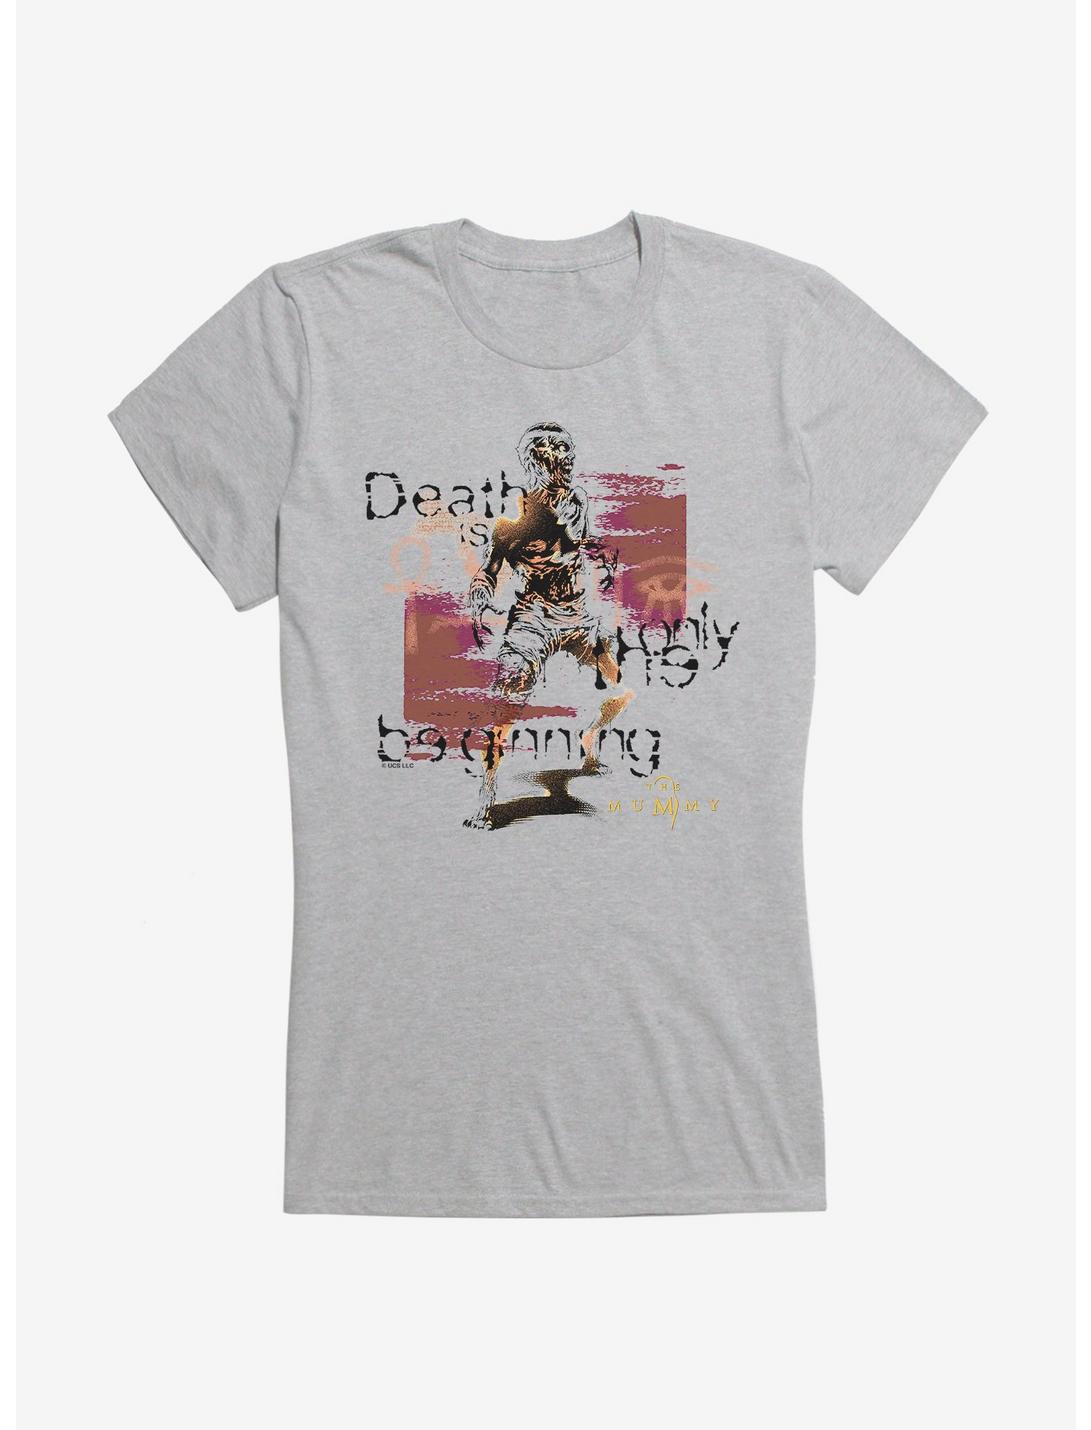 The Mummy Death Is Only The Beginning Girls T-Shirt, HEATHER, hi-res